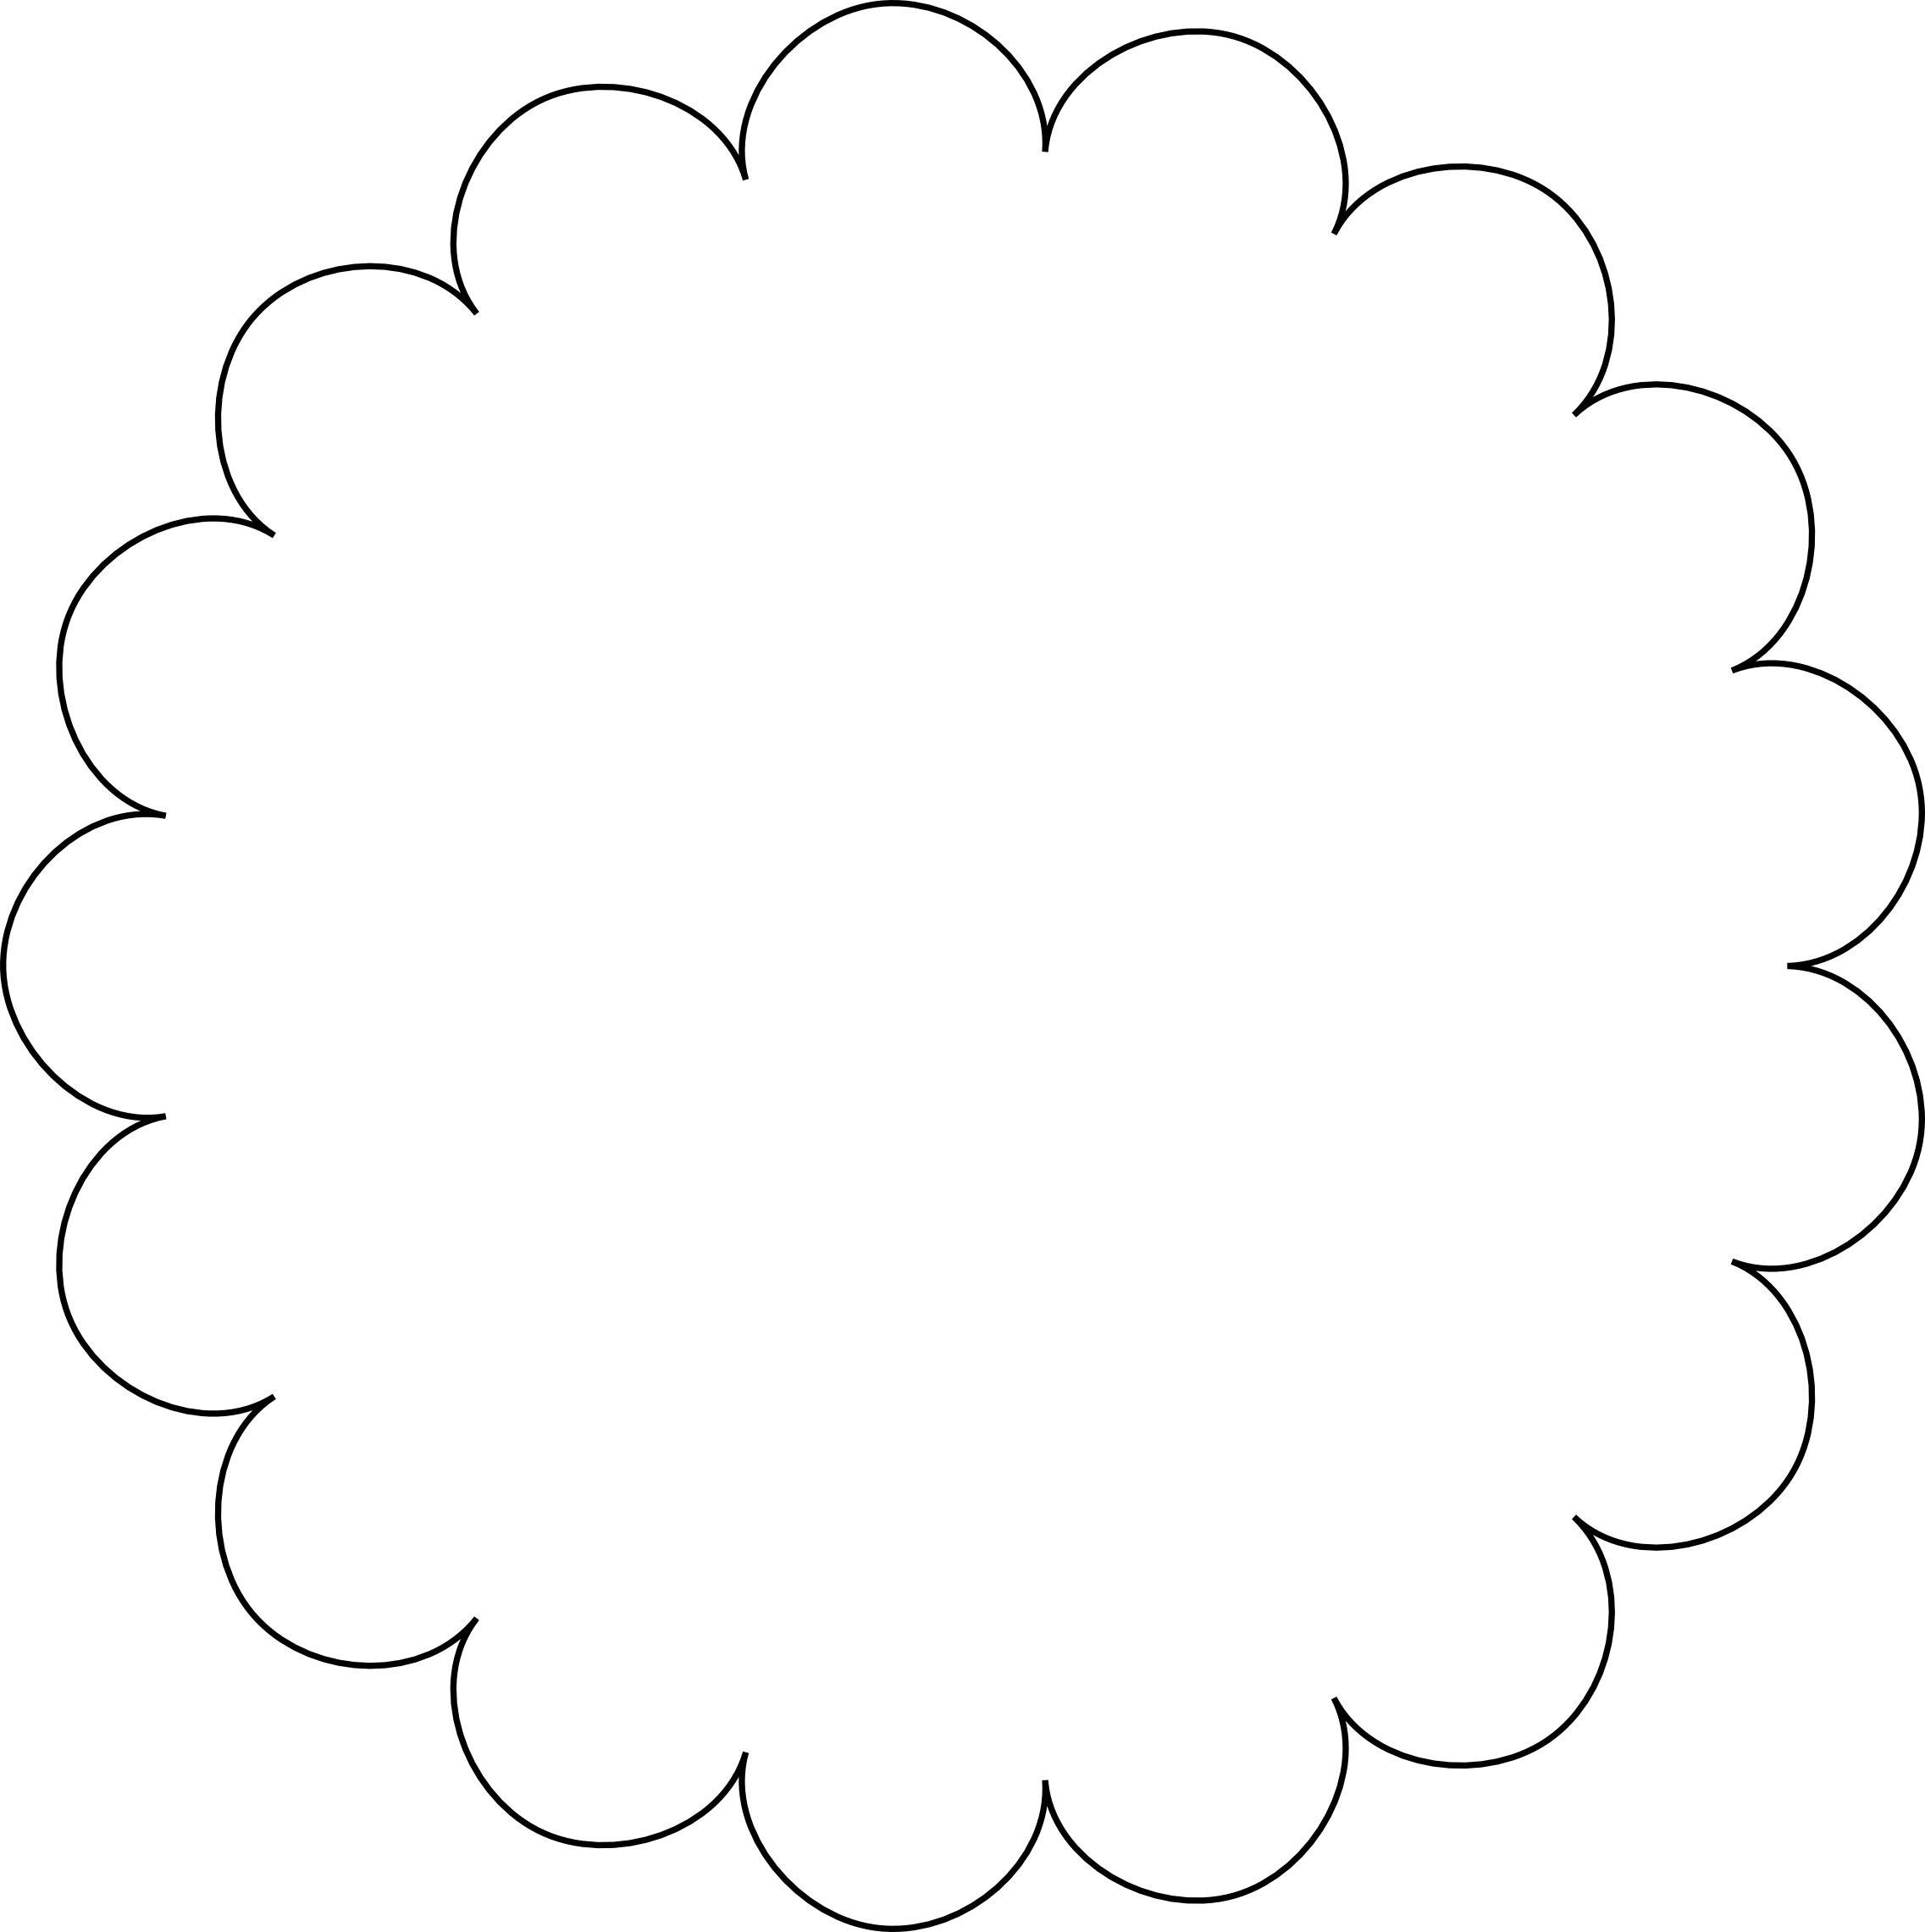 Scalloped Circle Template Free - ClipArt Best